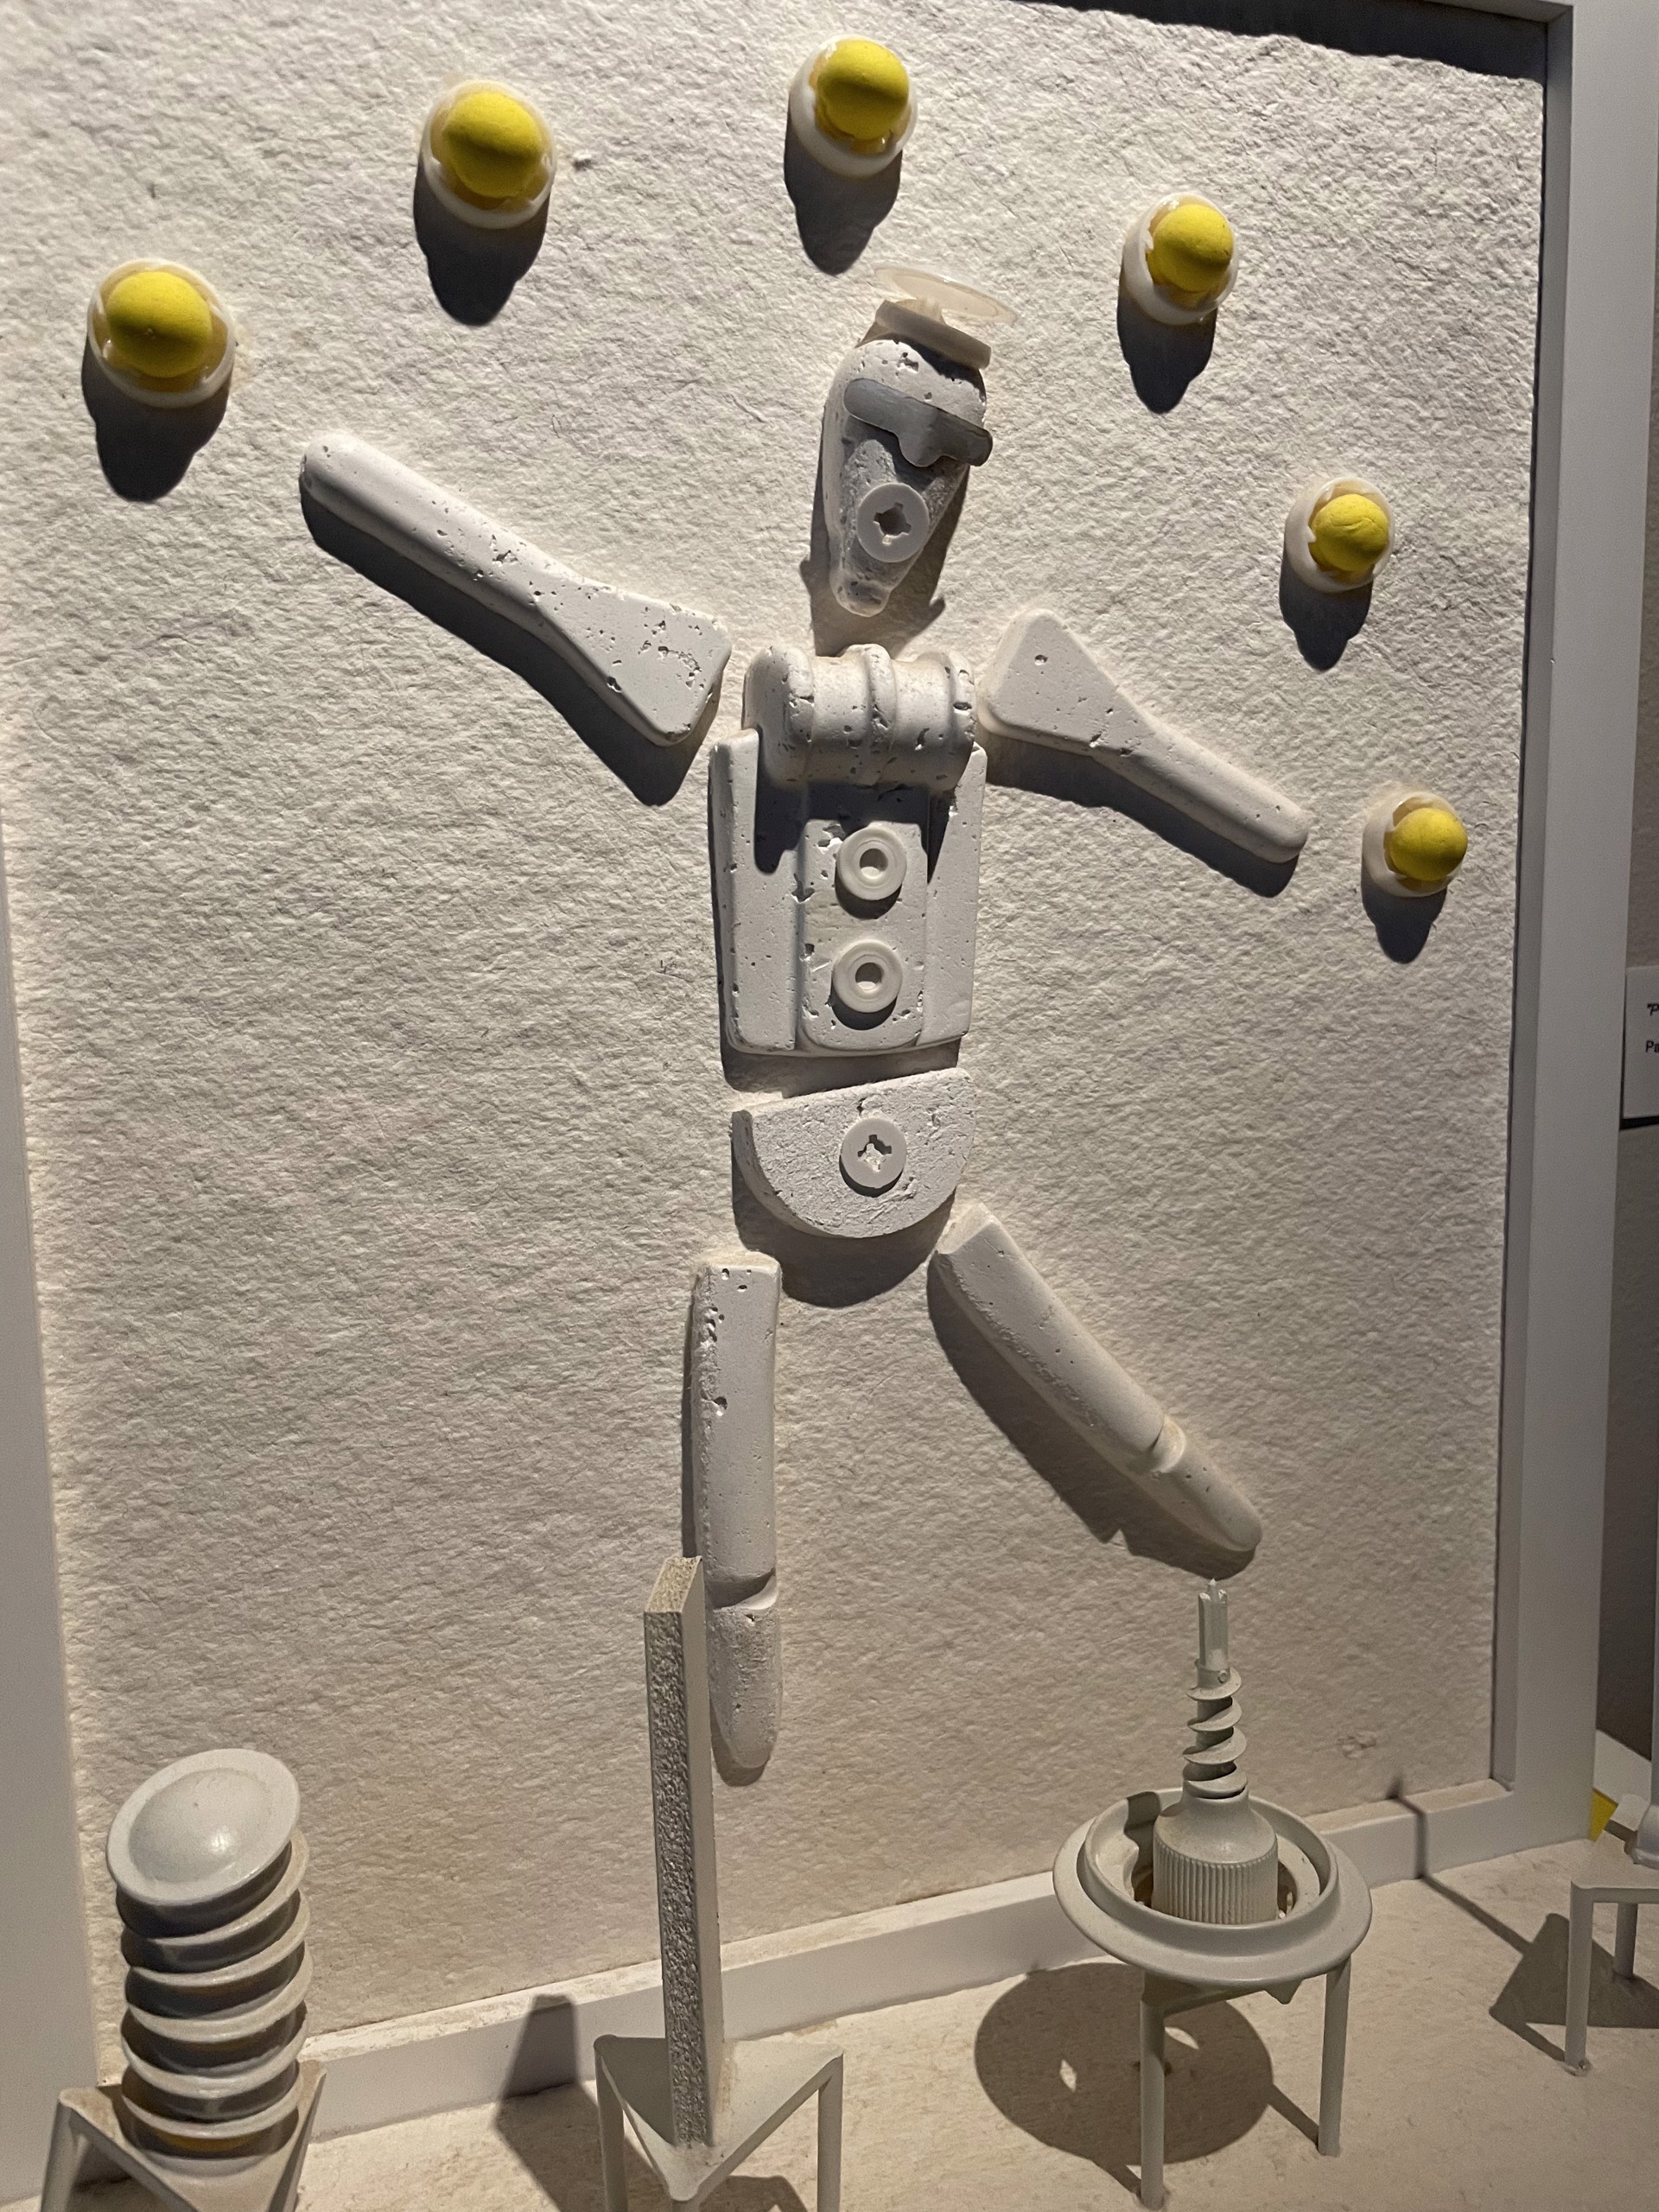 "Pulp Fiction/The Juggler with Small Sculptures" by Gary Webernick